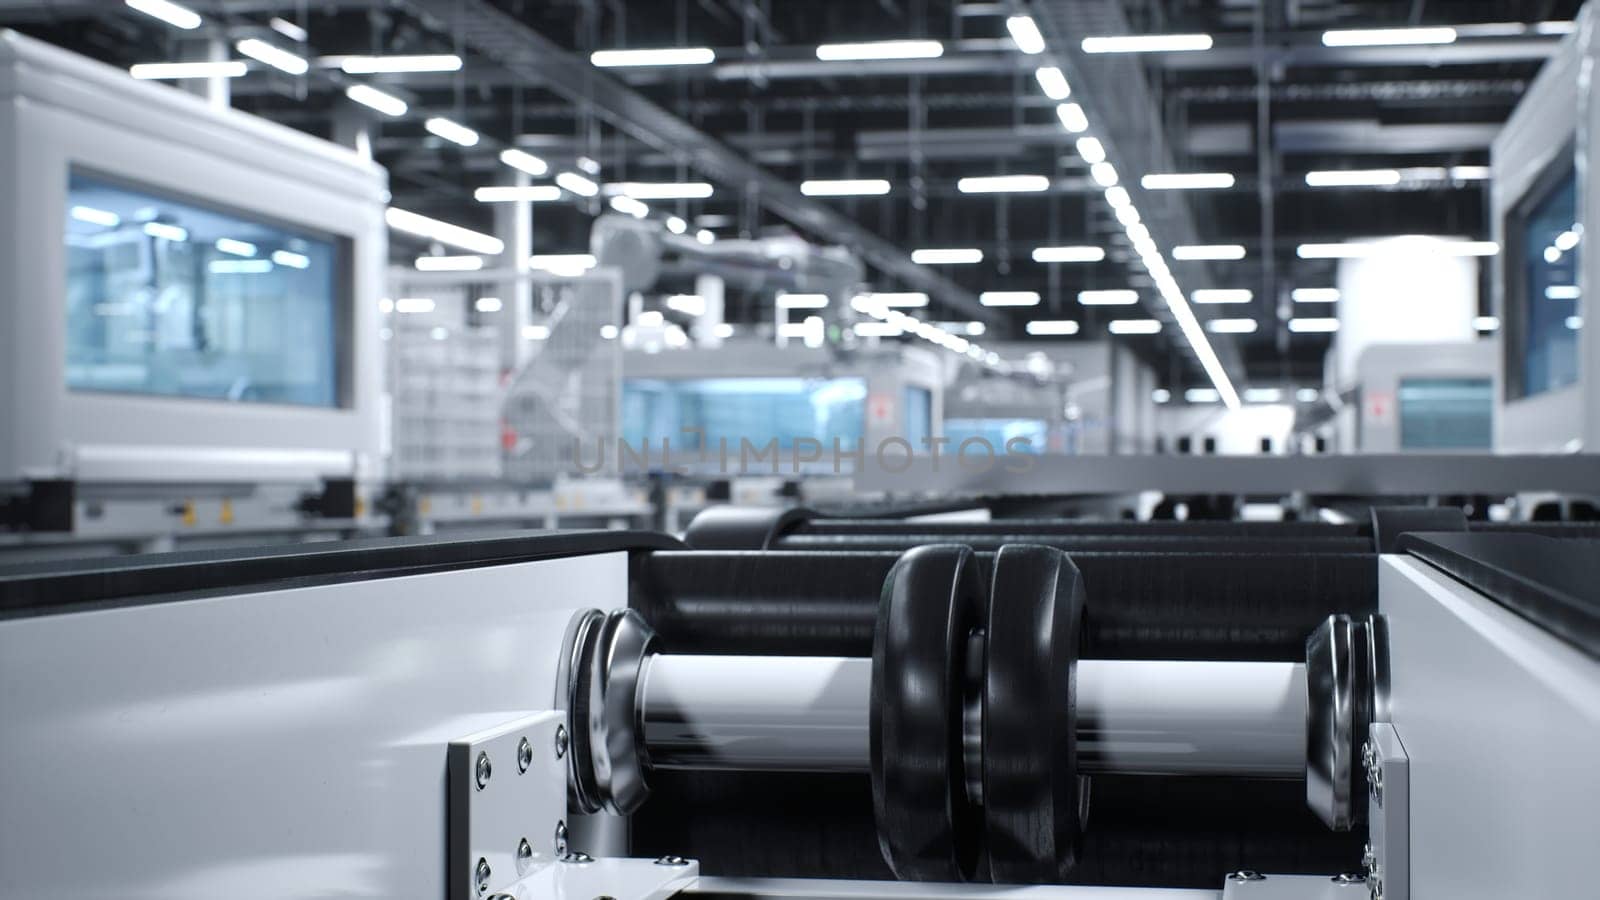 Focus on conveyor belt in cutting edge solar panel factory used for photovoltaic modules. Close up of assembly lines in sustainable energy based facility used for producing PV cells, 3D illustration